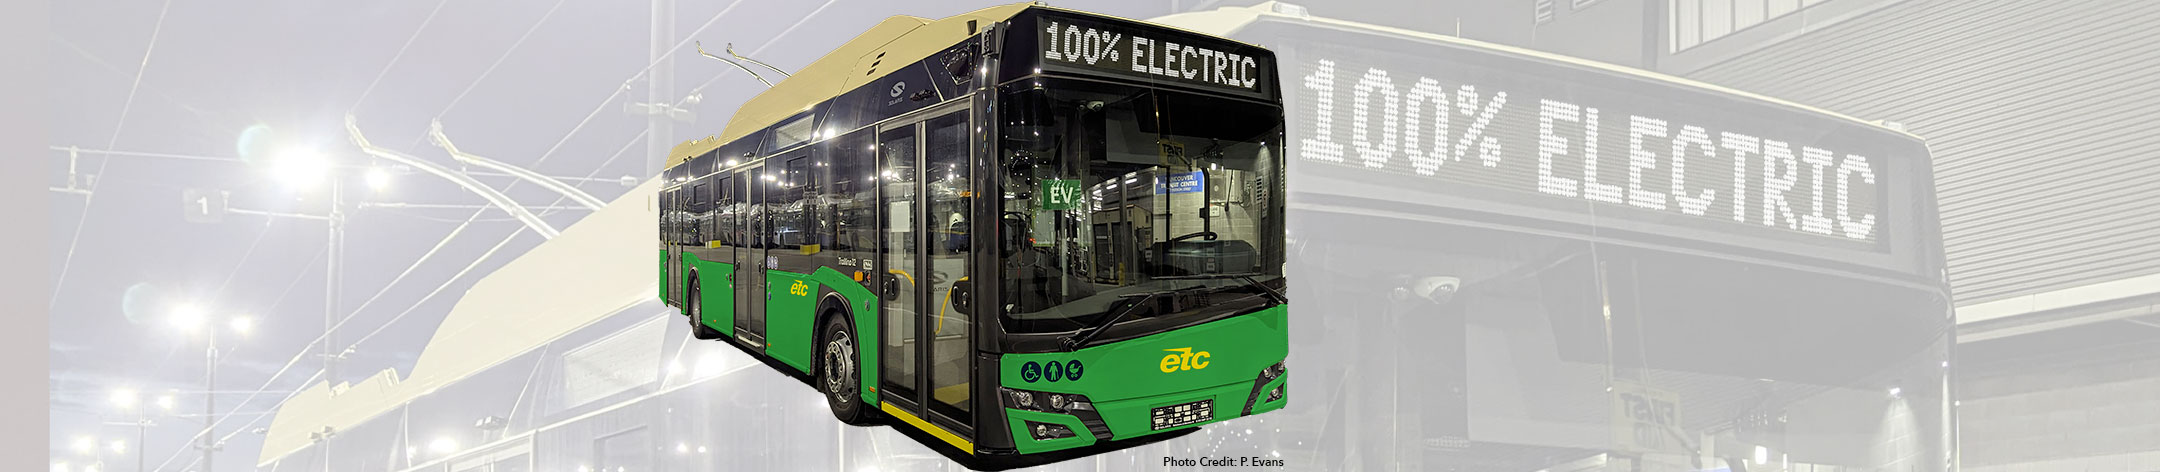 Banner image of an electric trolleybus